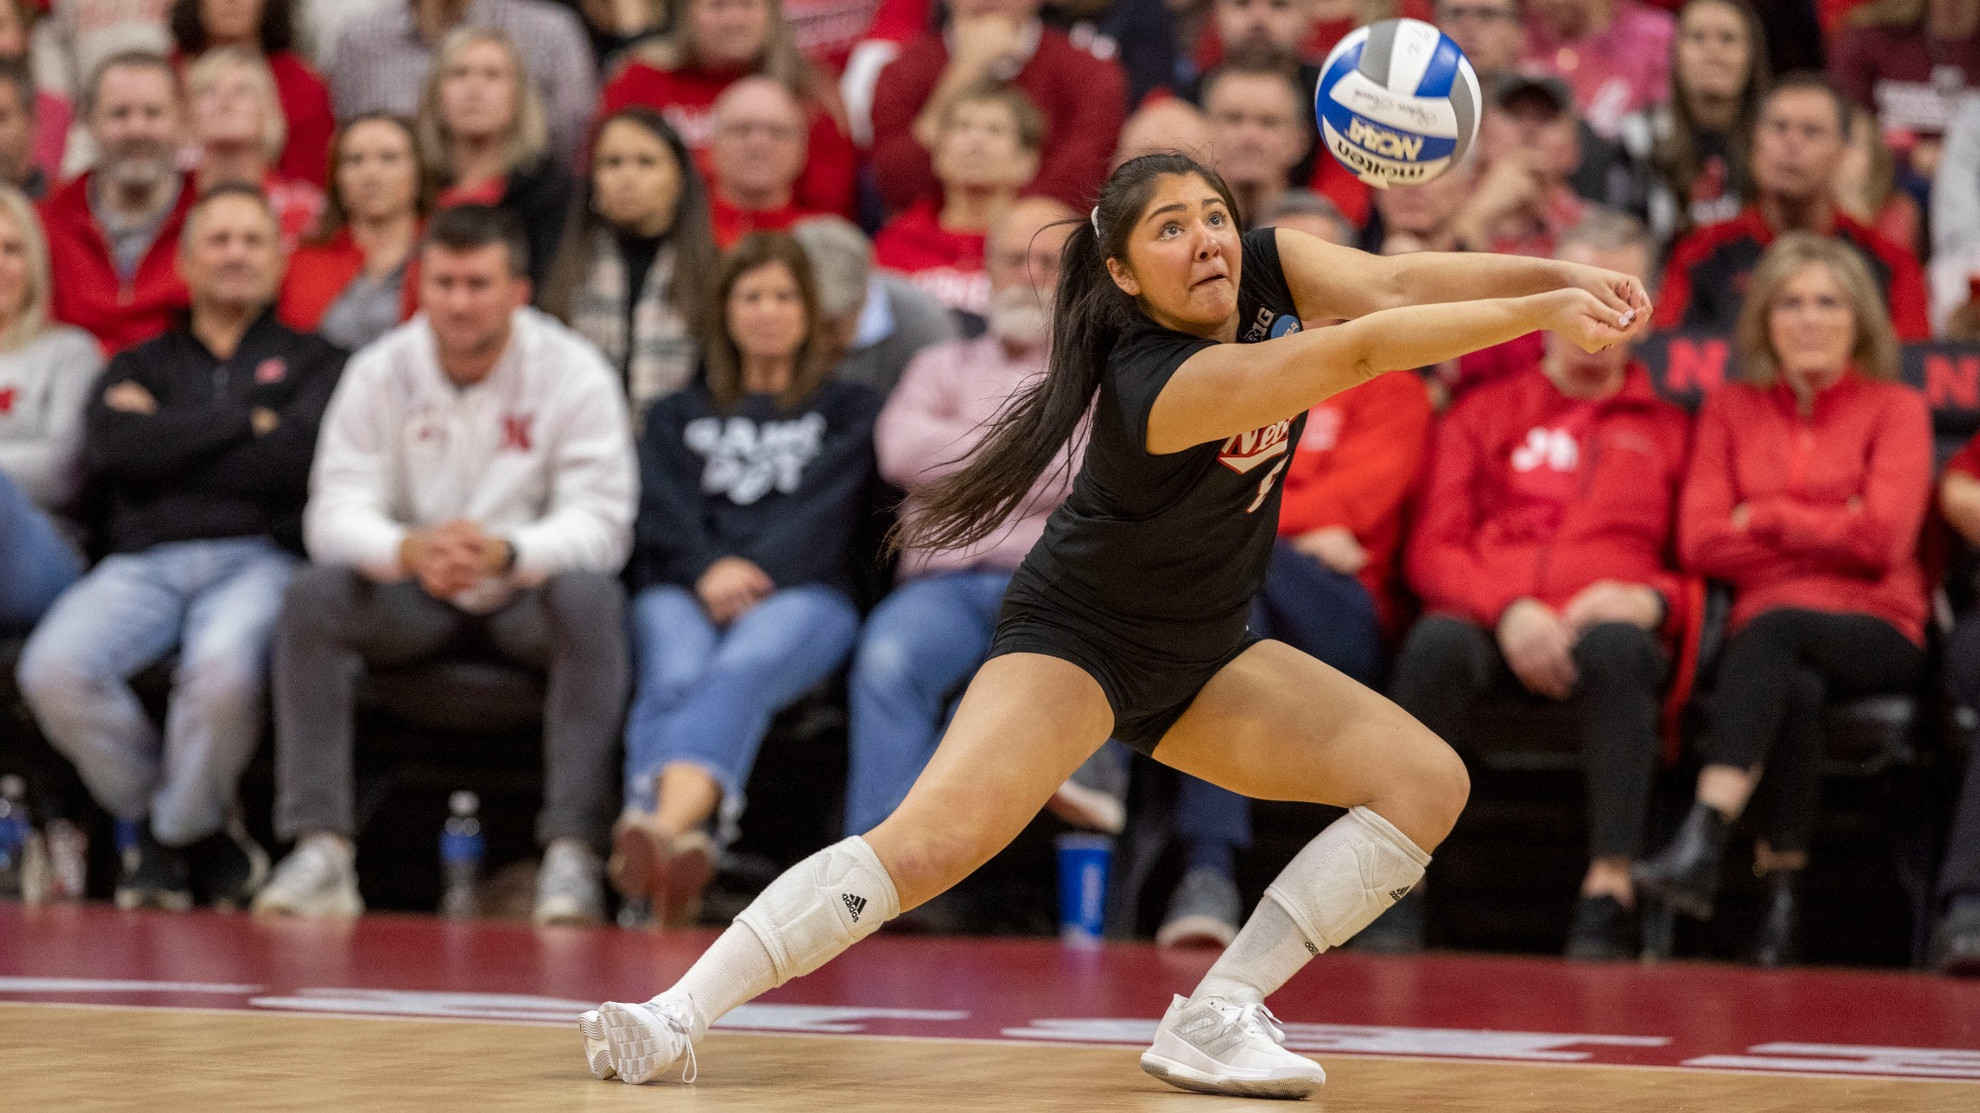 husker volleyball game tonight live